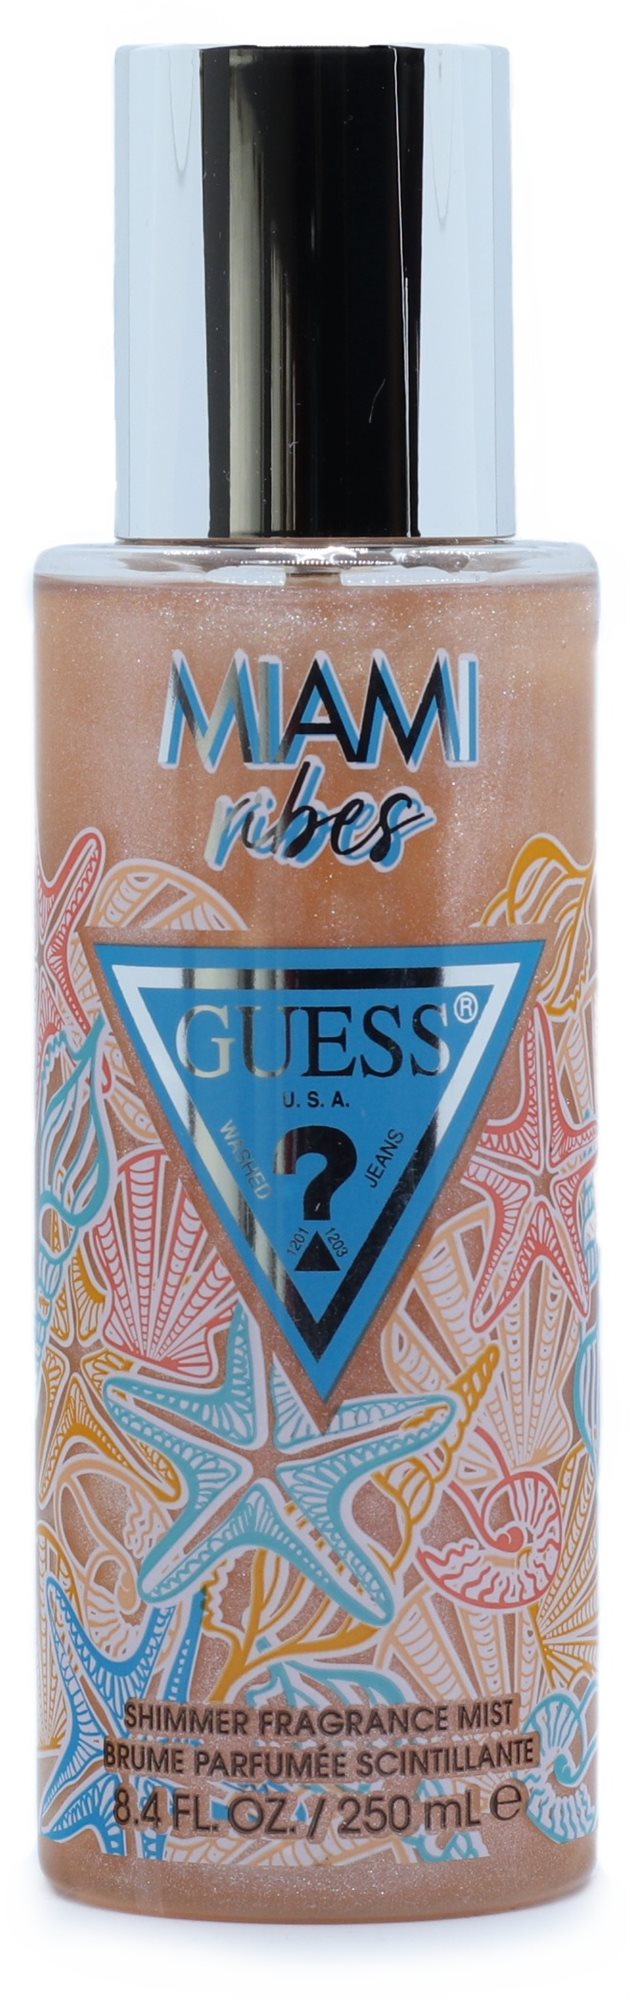 GUESS Miami Vibes 250 ml